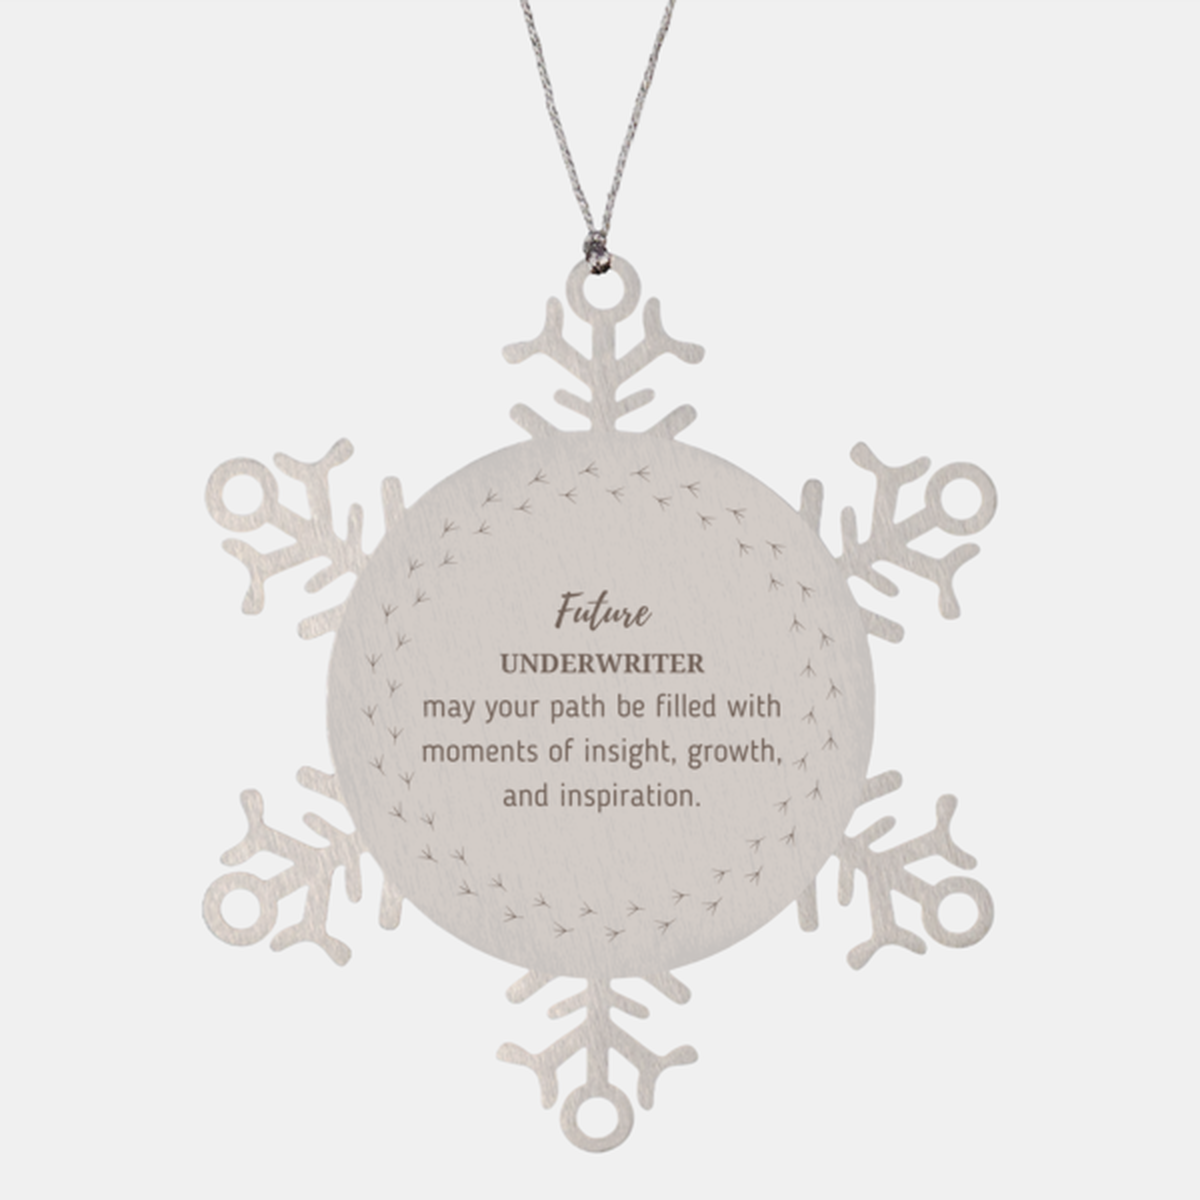 Future Underwriter Gifts, May your path be filled with moments of insight, Graduation Gifts for New Underwriter, Christmas Unique Snowflake Ornament For Men, Women, Friends